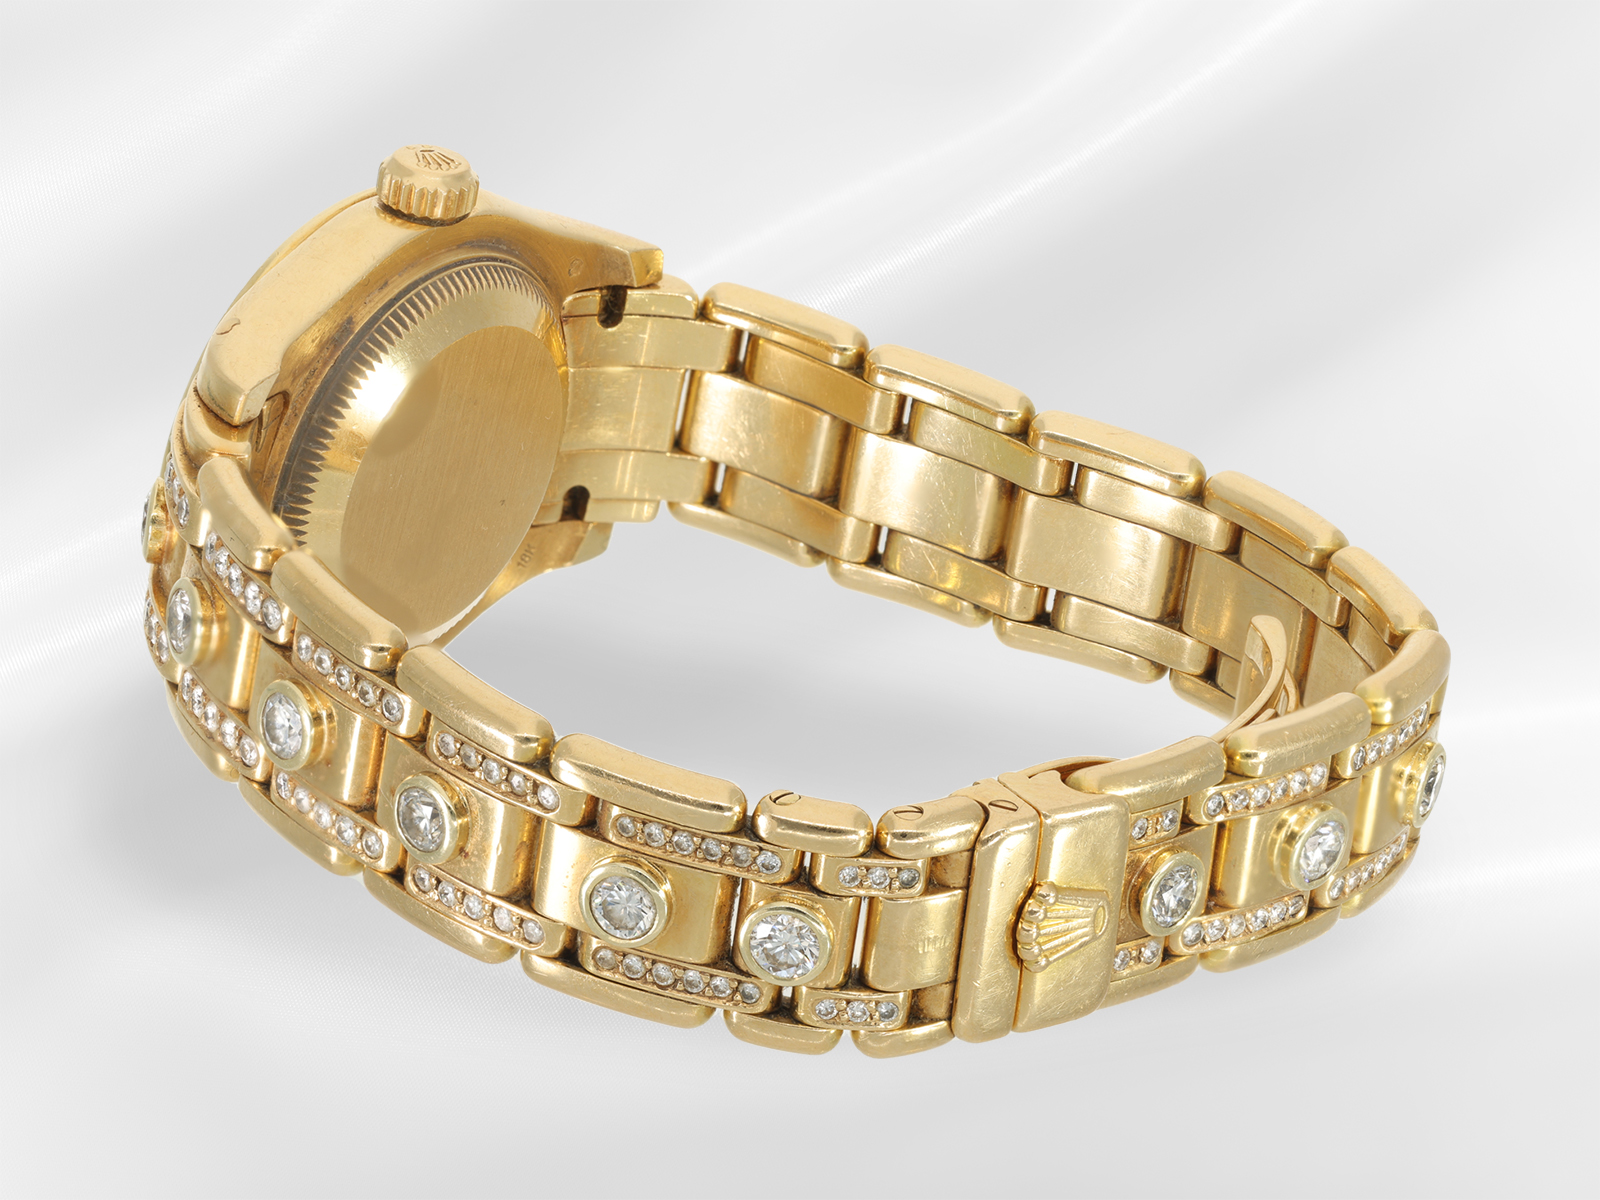 Wristwatch: wanted luxury ladies' watch Rolex Pearlmaster Ref.....with full brilliant-cut diamonds a - Image 5 of 6